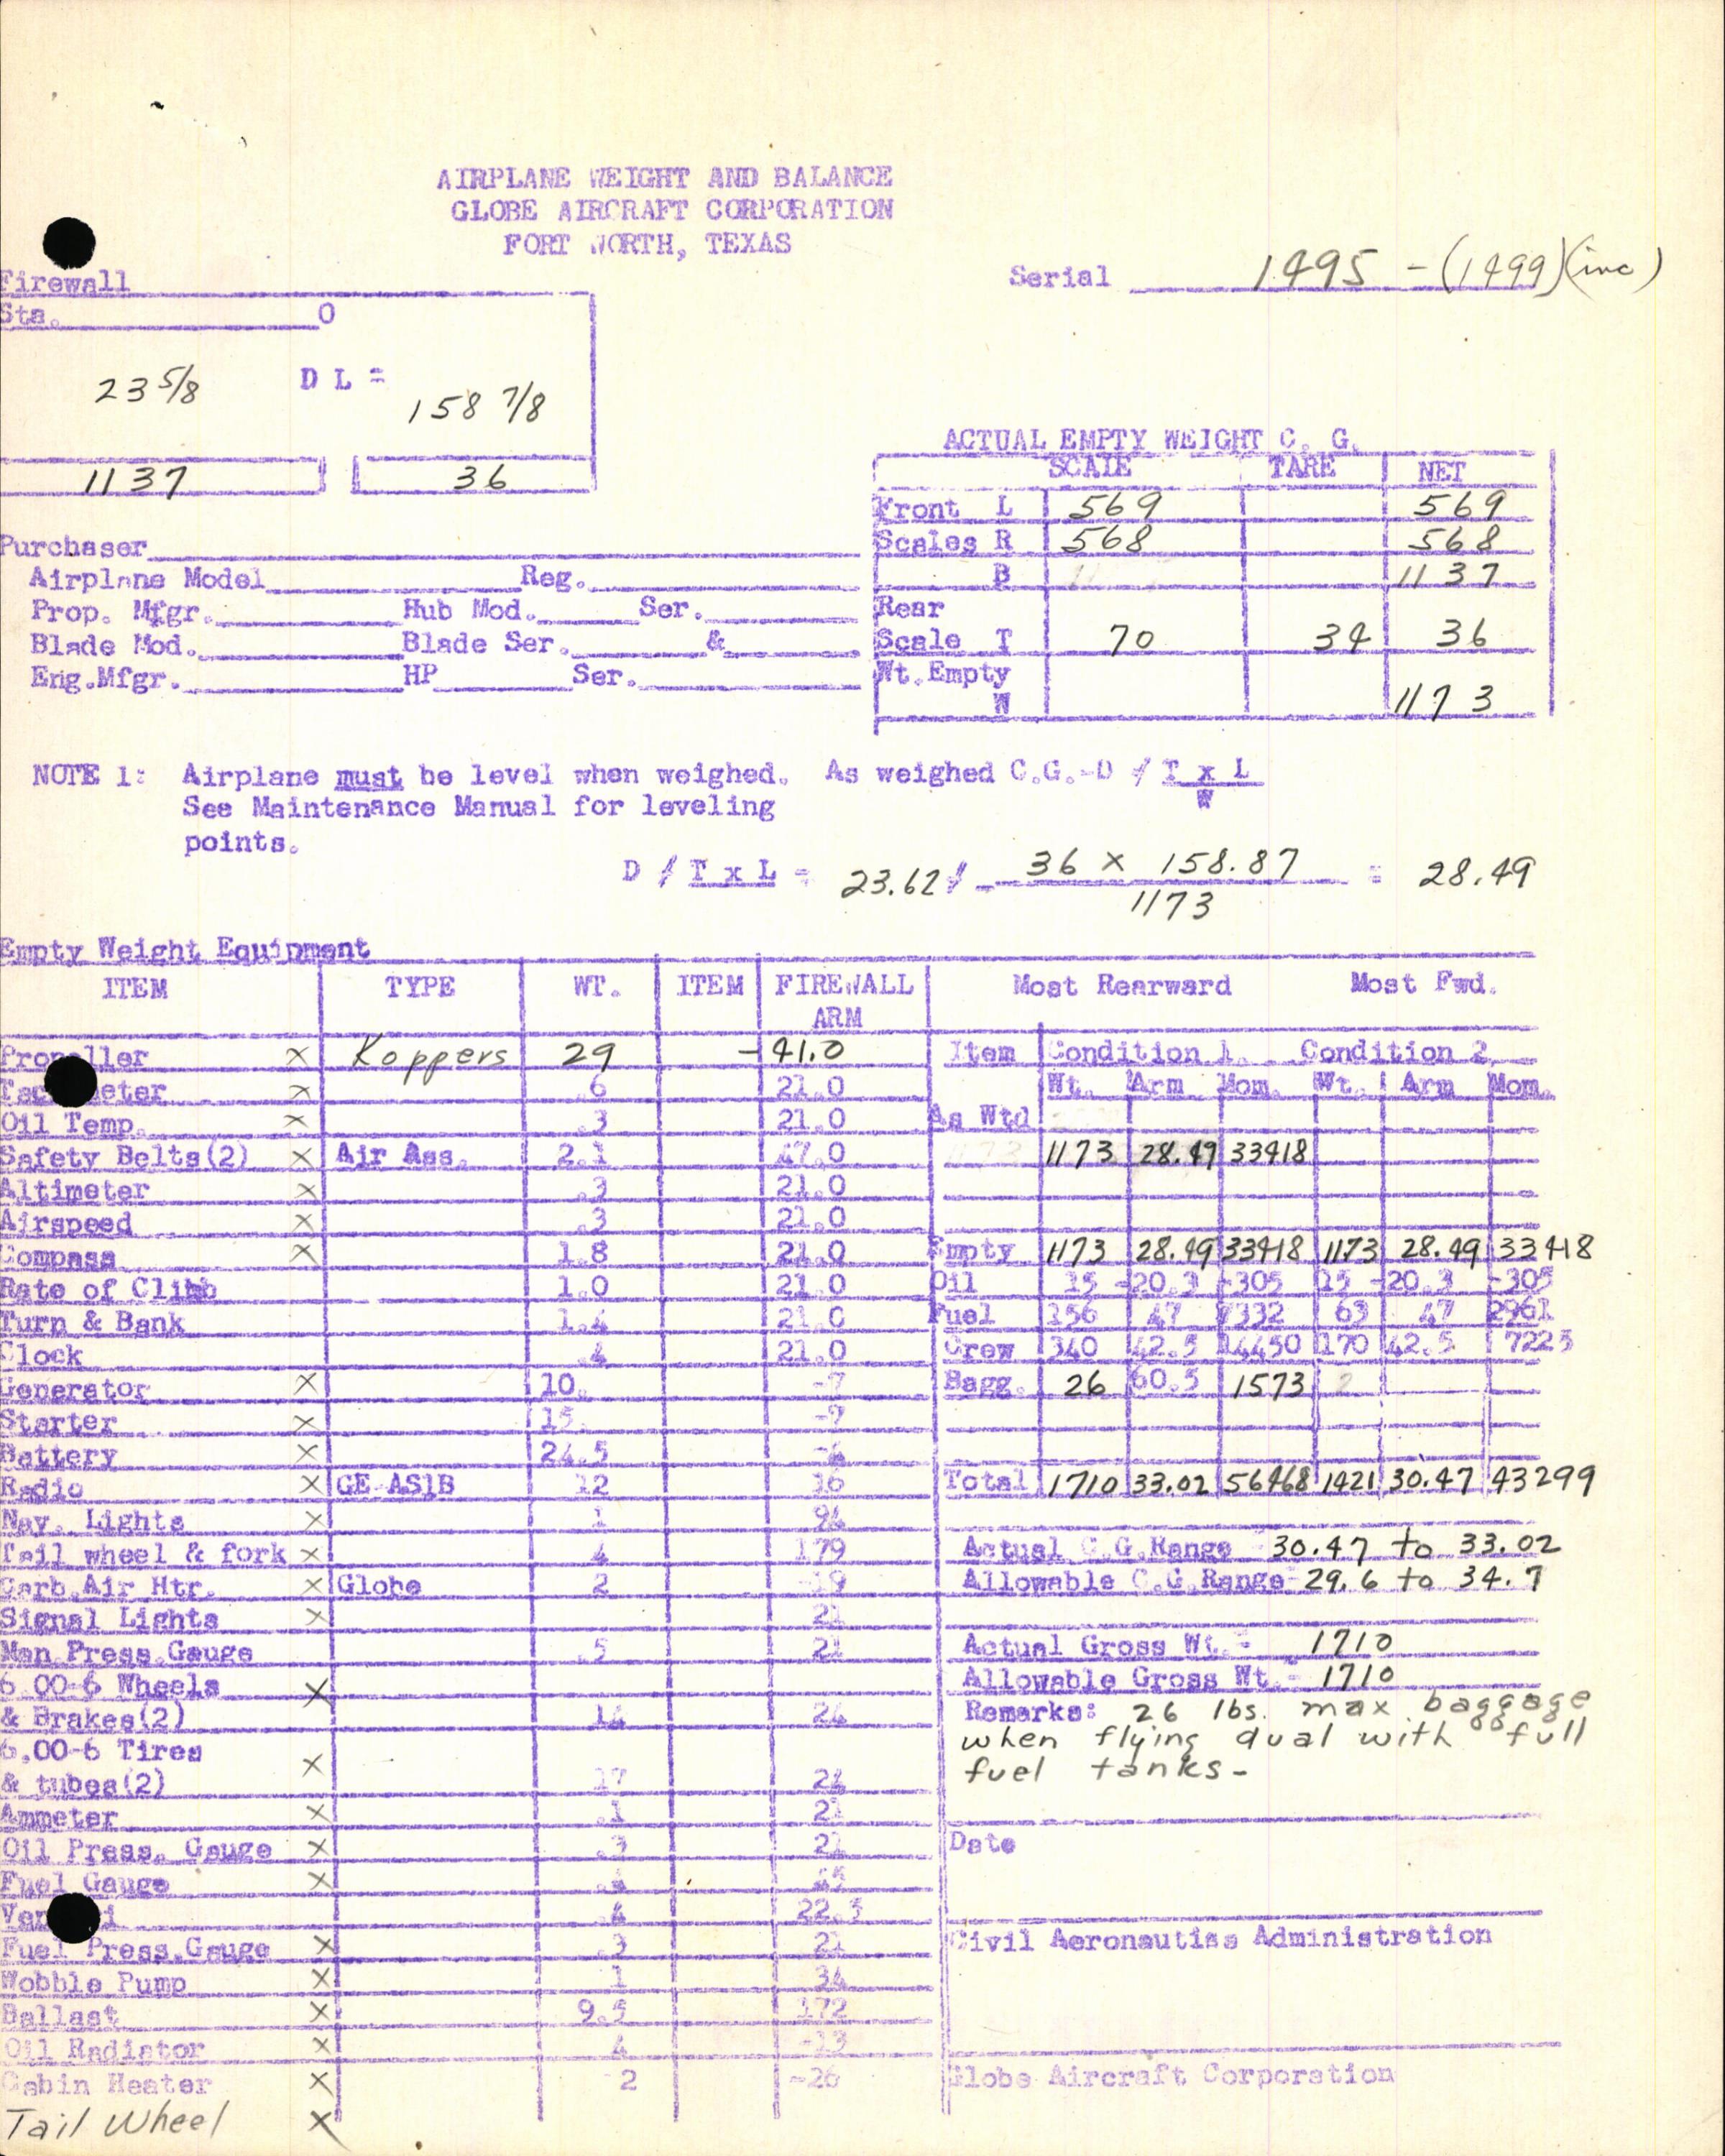 Sample page 7 from AirCorps Library document: Technical Information for Serial Number 1495